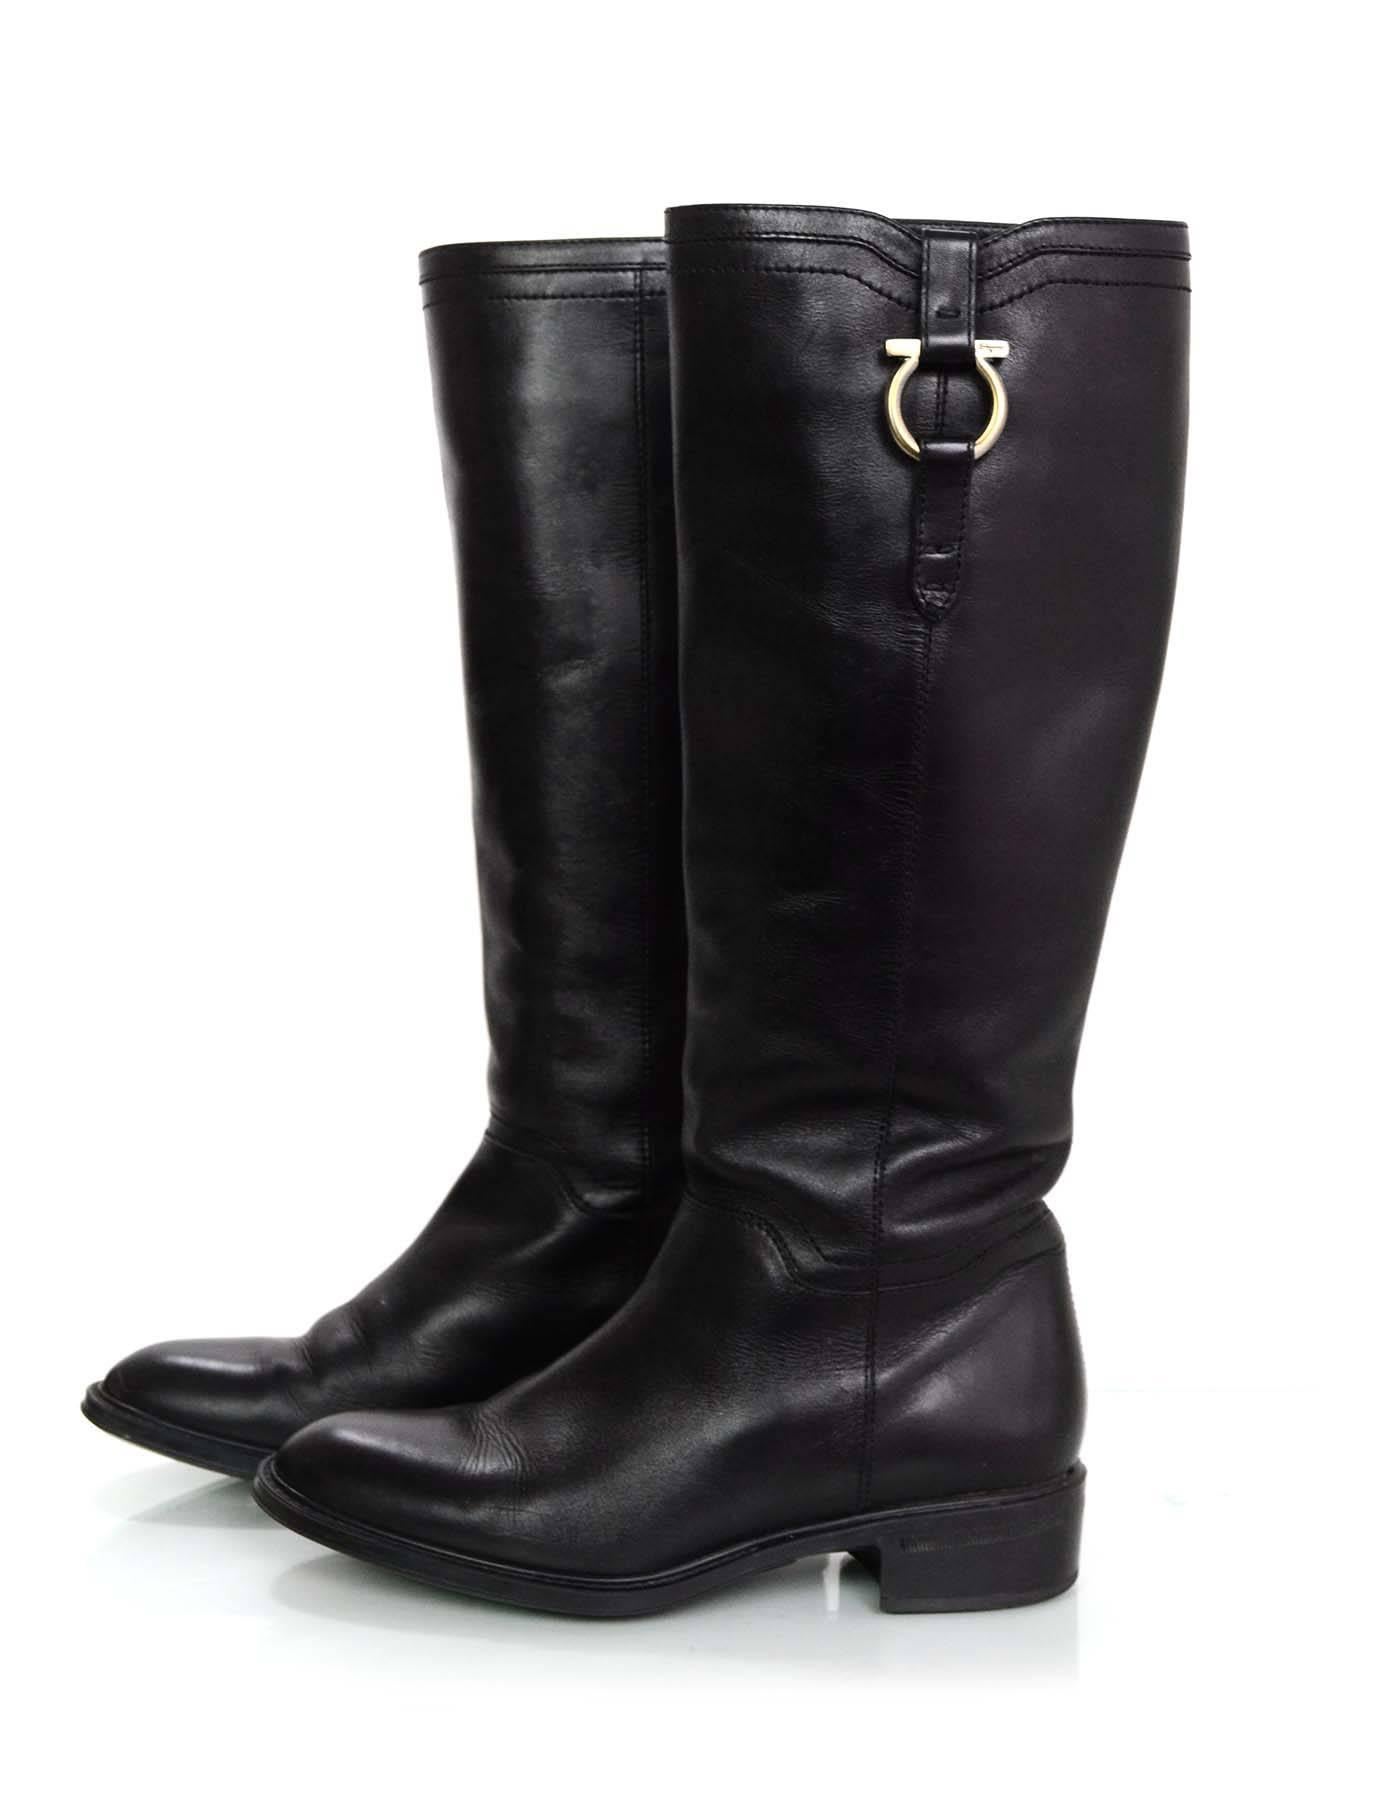 Salvatore Ferragamo Black Leather Boots Sz 5.5

Made In: Italy
Color: Black
Materials: Leather, metal
Closure: Pull up
Sole Stamp: Salvatore Ferragamo Made in Italy
Overall Condition: Very goof pre-owned condition with the exception of very